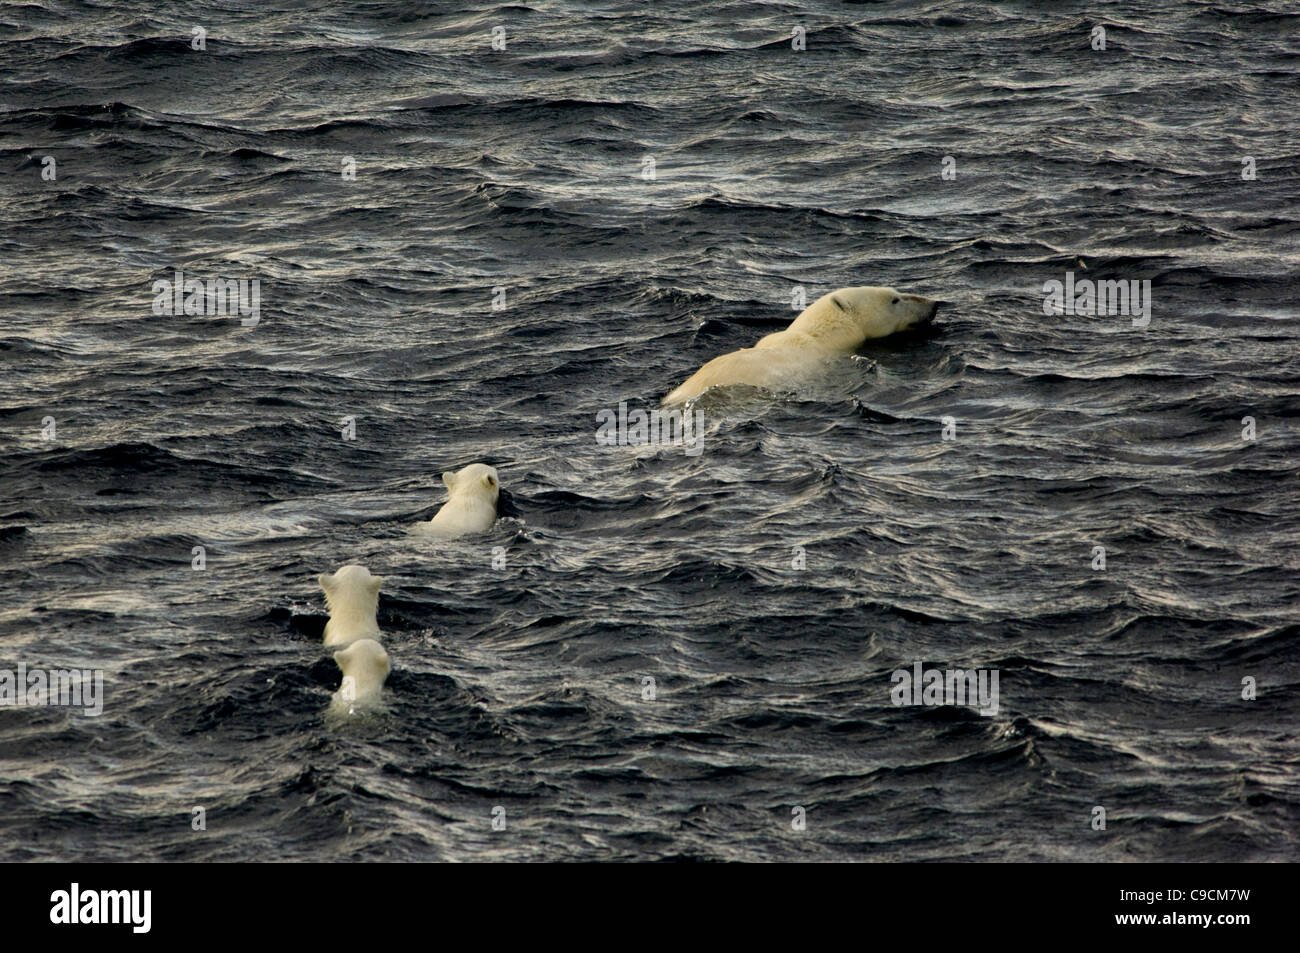 Three young Polar Bear cubs (Ursus maritimus) swimming after their mother in the sea, Freemansundet (between Barentsøya and Edgeøya), Svalbard Archipelago, Norway Stock Photo